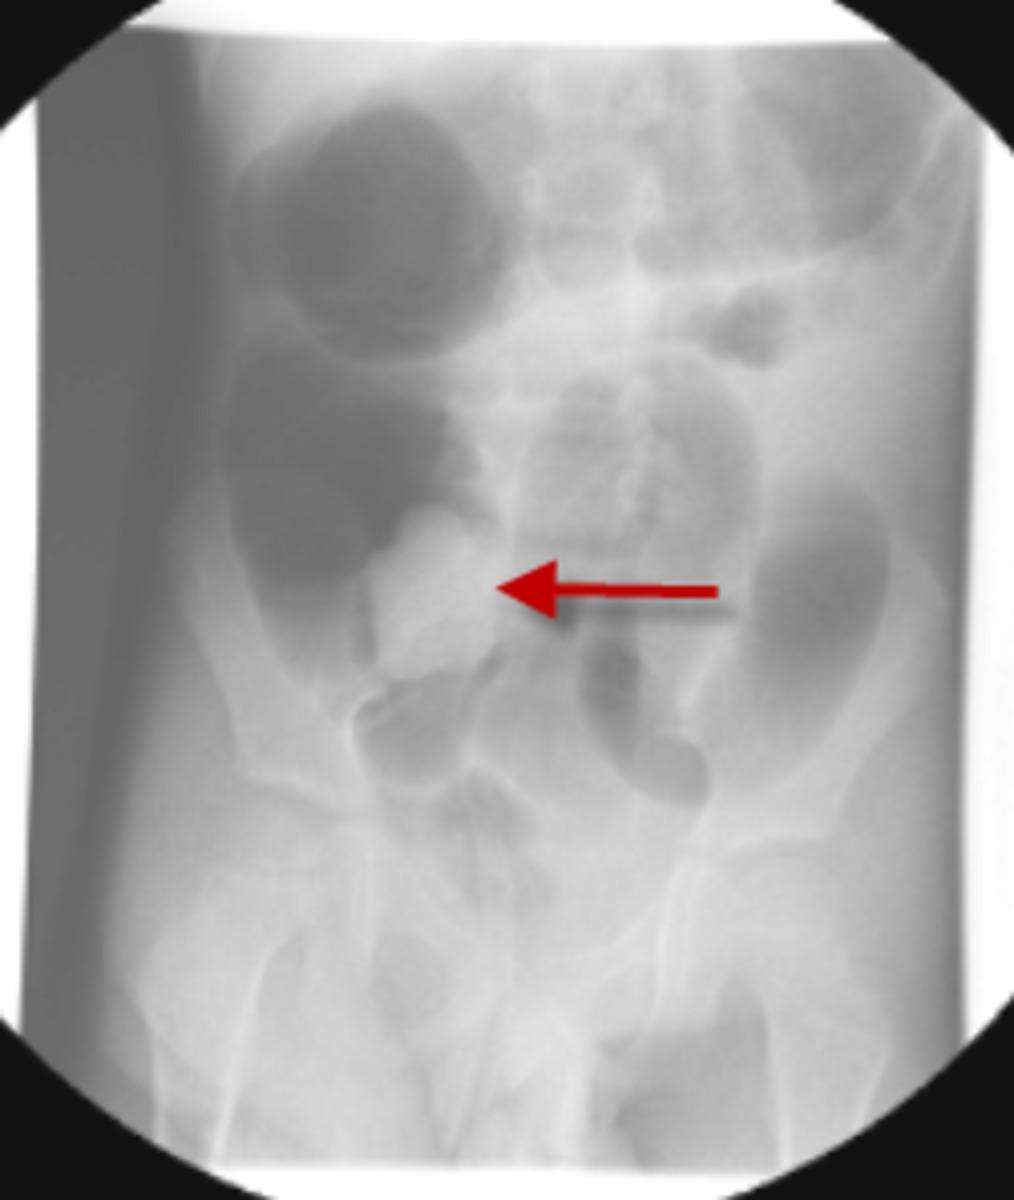 Fig. 2: Fluoroscopy (anteposterior view in supine position) of the